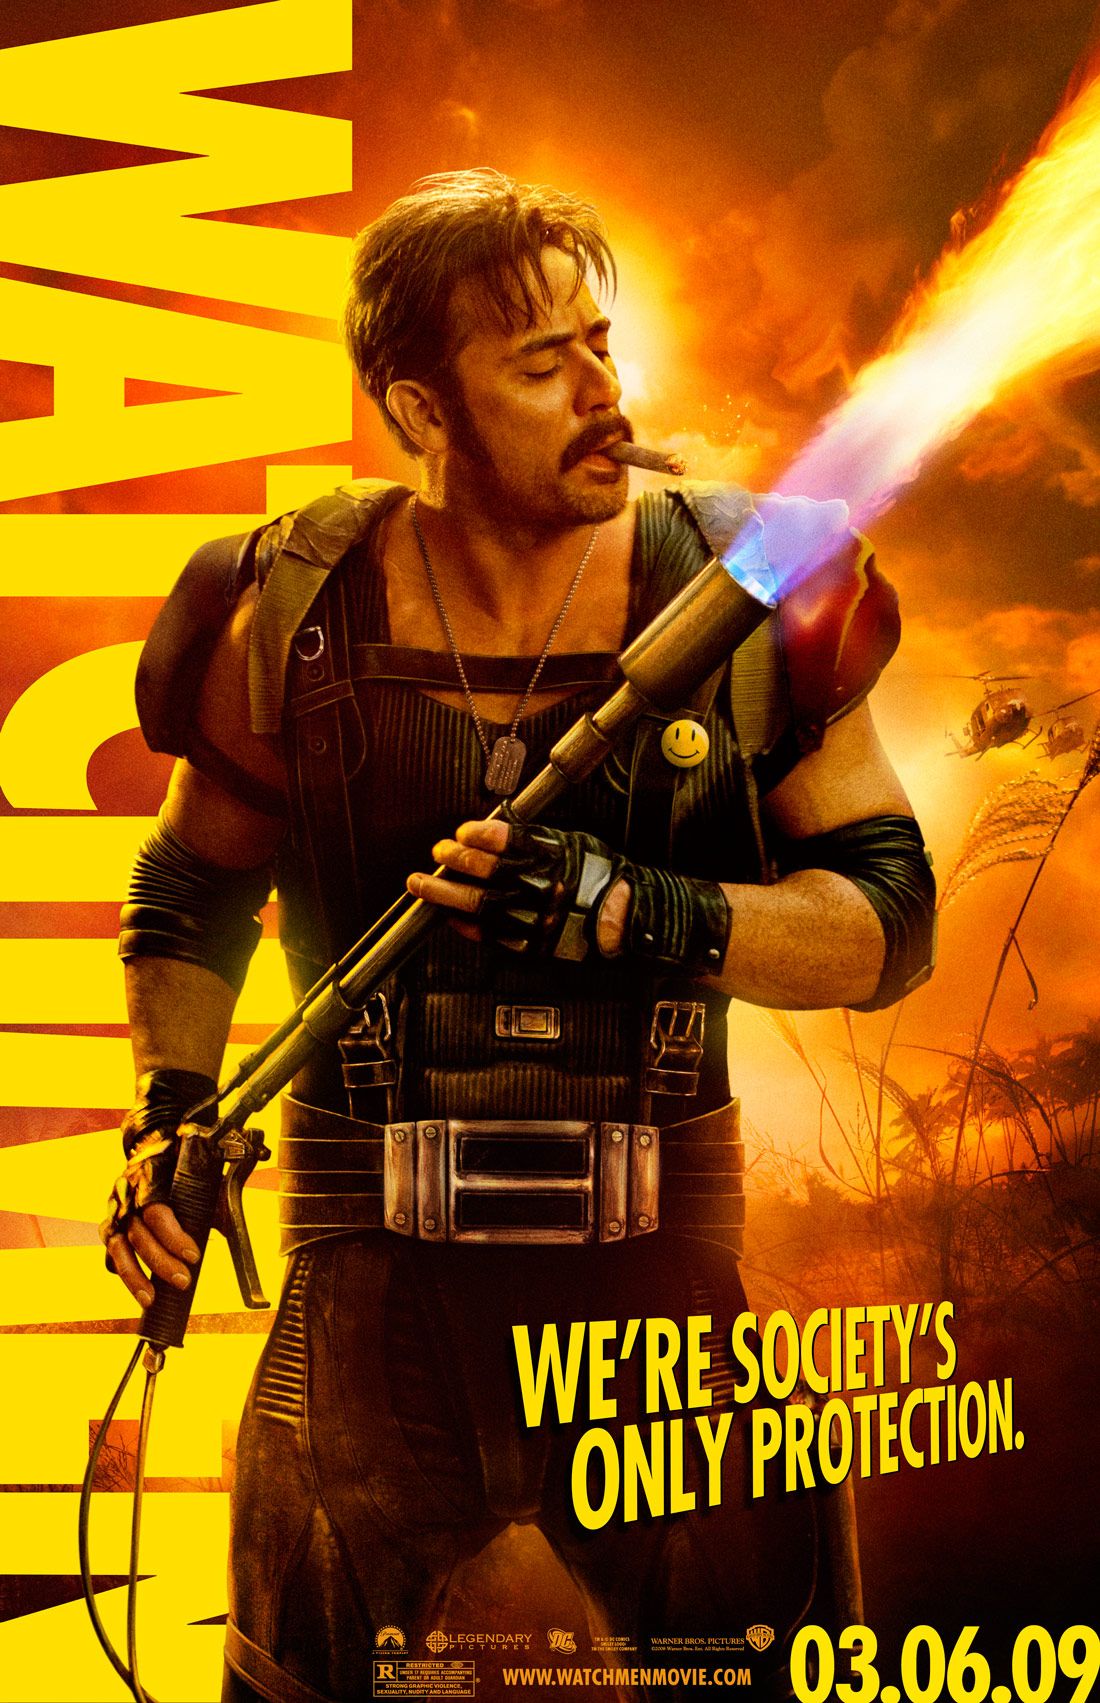 Watchmen Character Poster #1